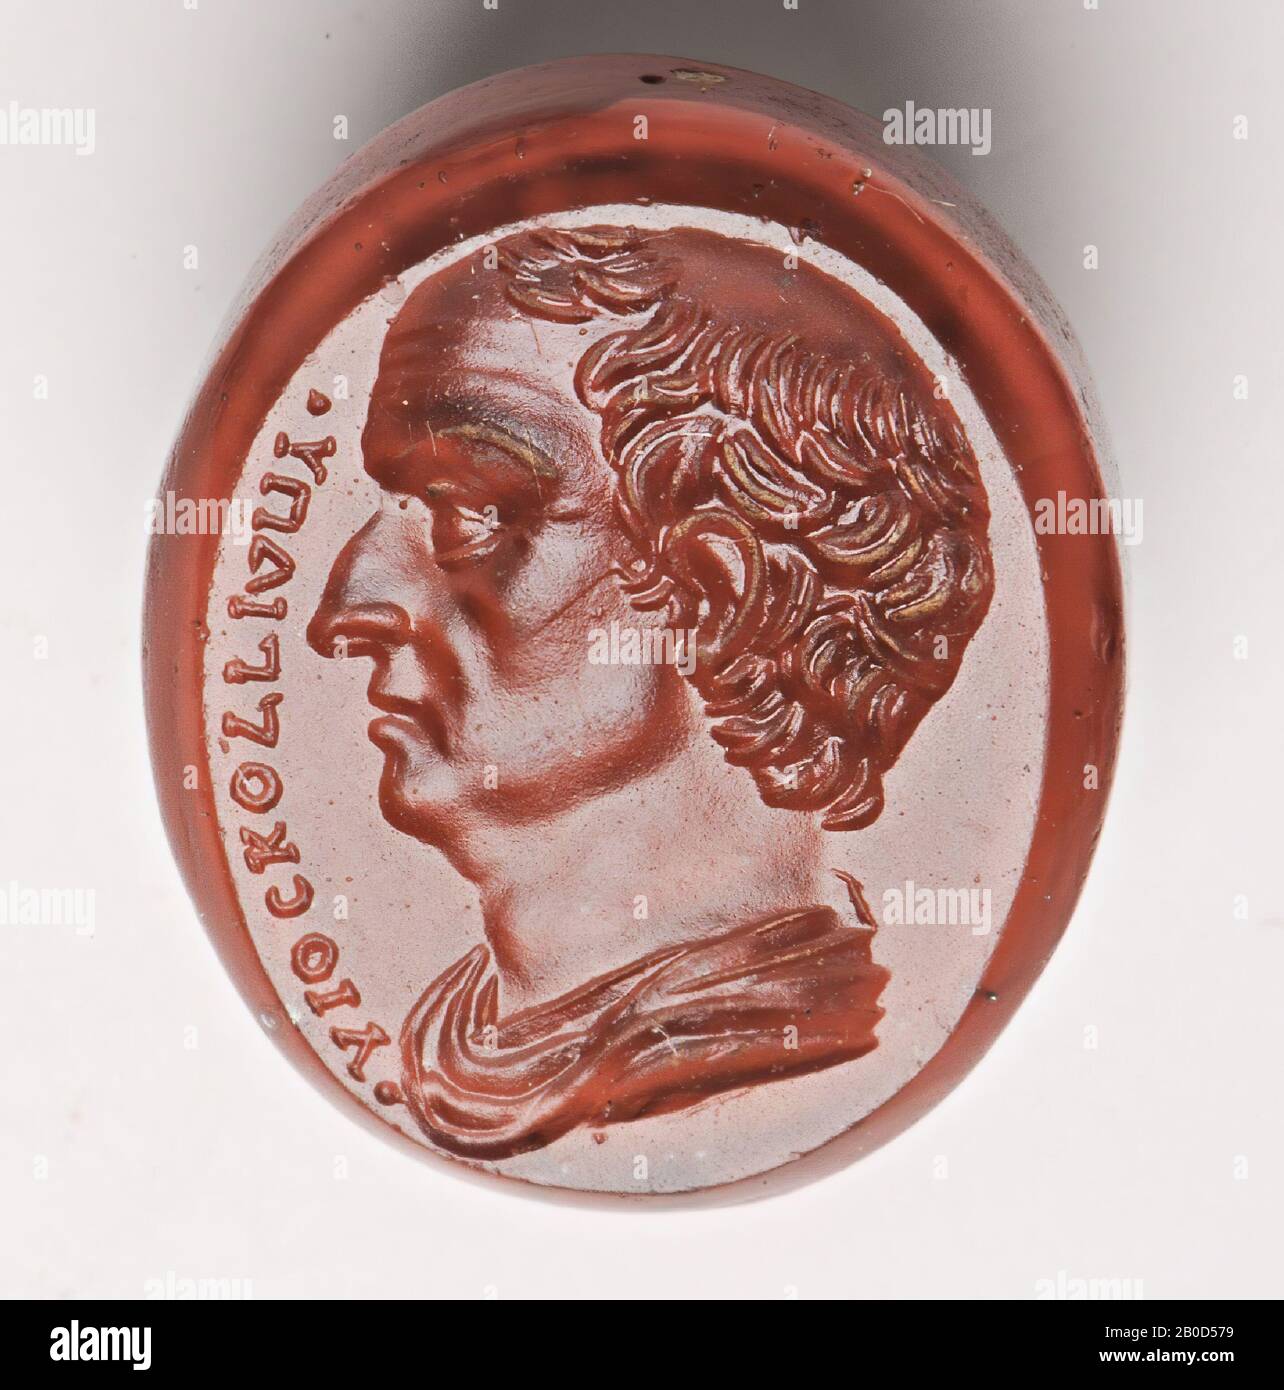 Vz: the man has a bald head, wrinkled forehead and a robe around his shoulders, gem, intaglio, unknown, Color: red-orange, Shape: oval, Processing: edge at the front slightly receding with respect to the middle from the edge, 12 x 15 x 4 mm Stock Photo